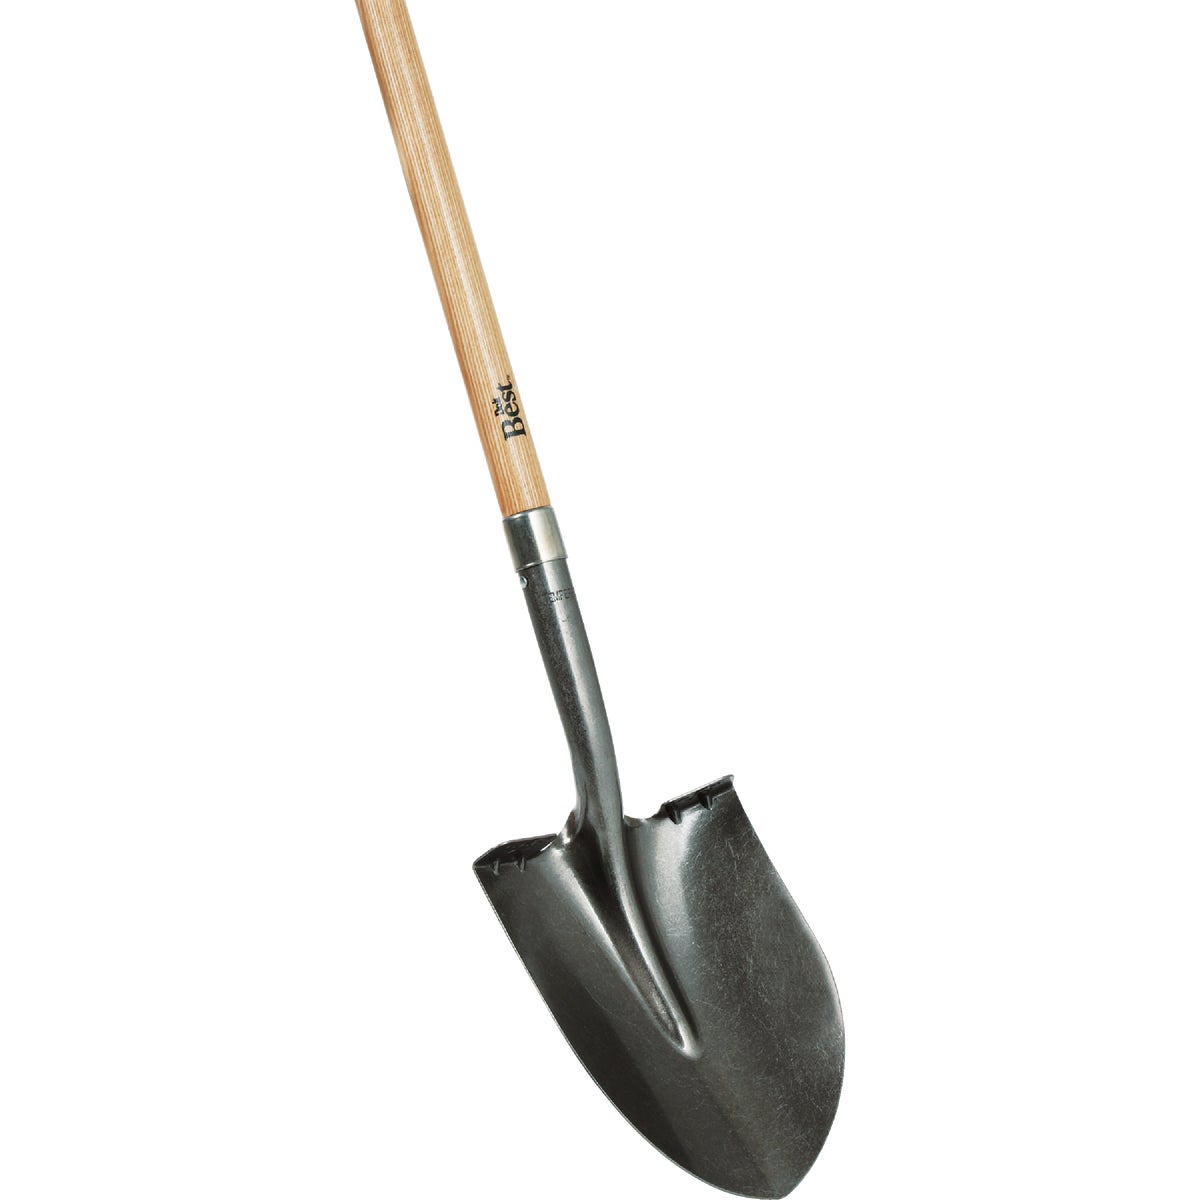 Item 755869, Round point, hollow back shovel with 16-gauge, powder coated carbon steel 